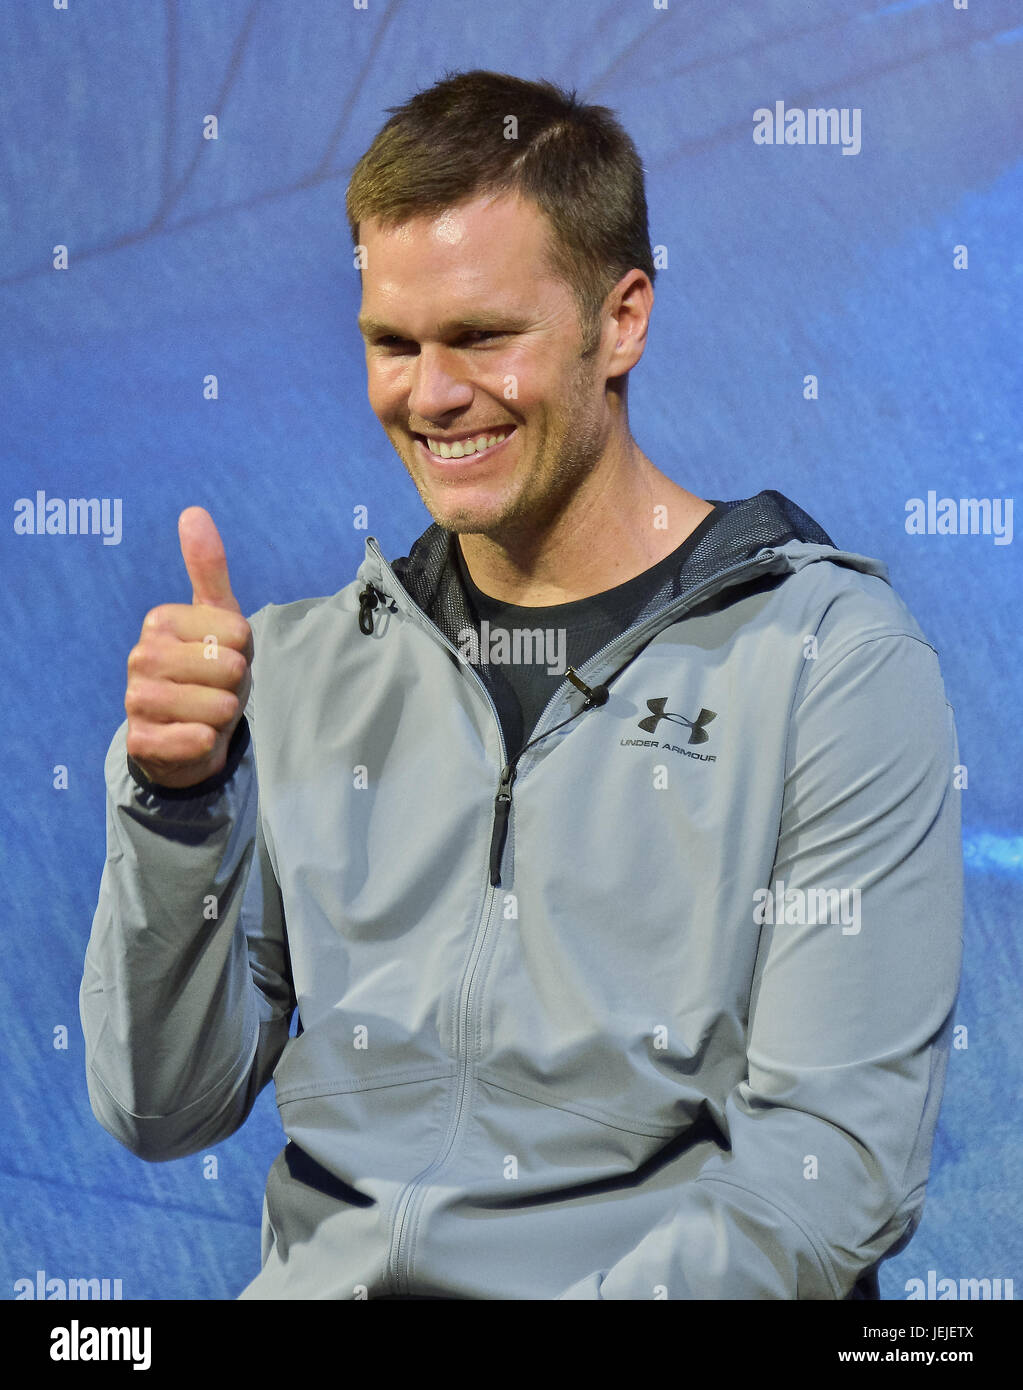 Tokyo, Japan. 25th June, 2017. Tom Brady, UNDER ARMOUR, June 22, 2017, Tokyo, Japan : New England Patriots quarterback Tom Brady attends a press conference for Athlete Recovery Sleepwear of UNDER ARMOUR at head office of DOME CORPORATION in Tokyo, Japan on June 22, 2017. Credit: AFLO/Alamy Live News Stock Photo